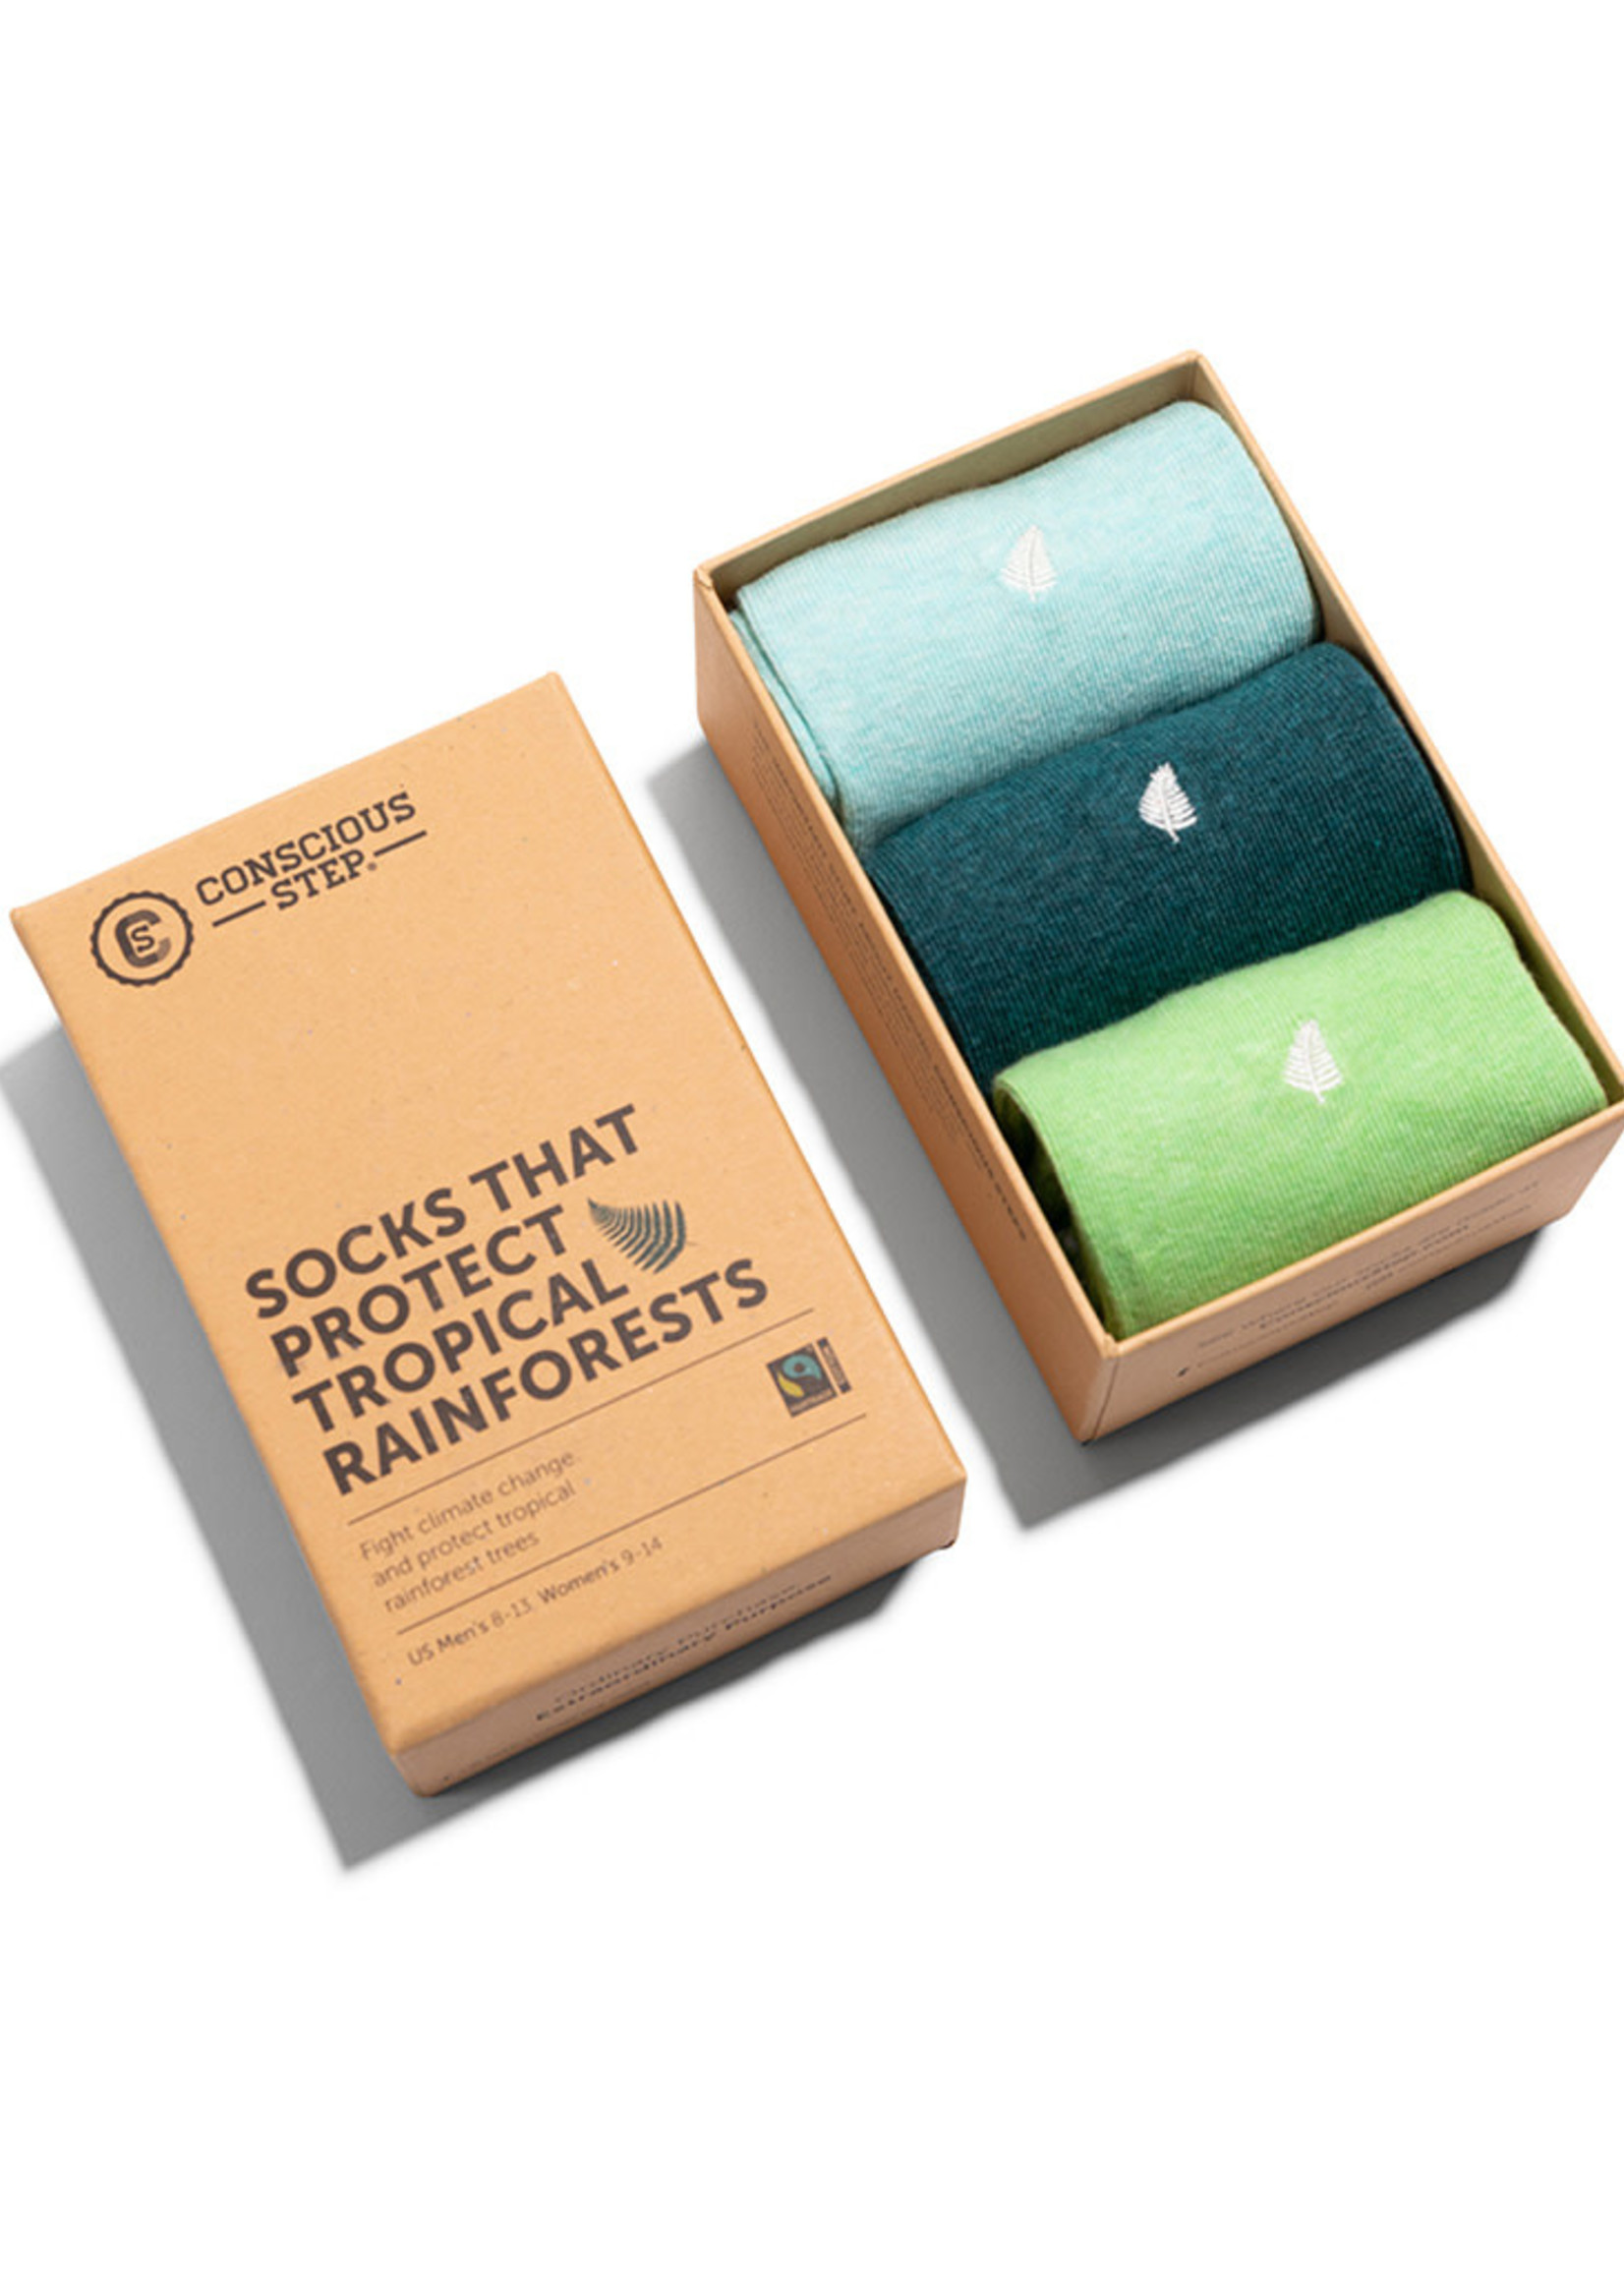 Conscious Step Women's Box of Socks That Protect Rainforests